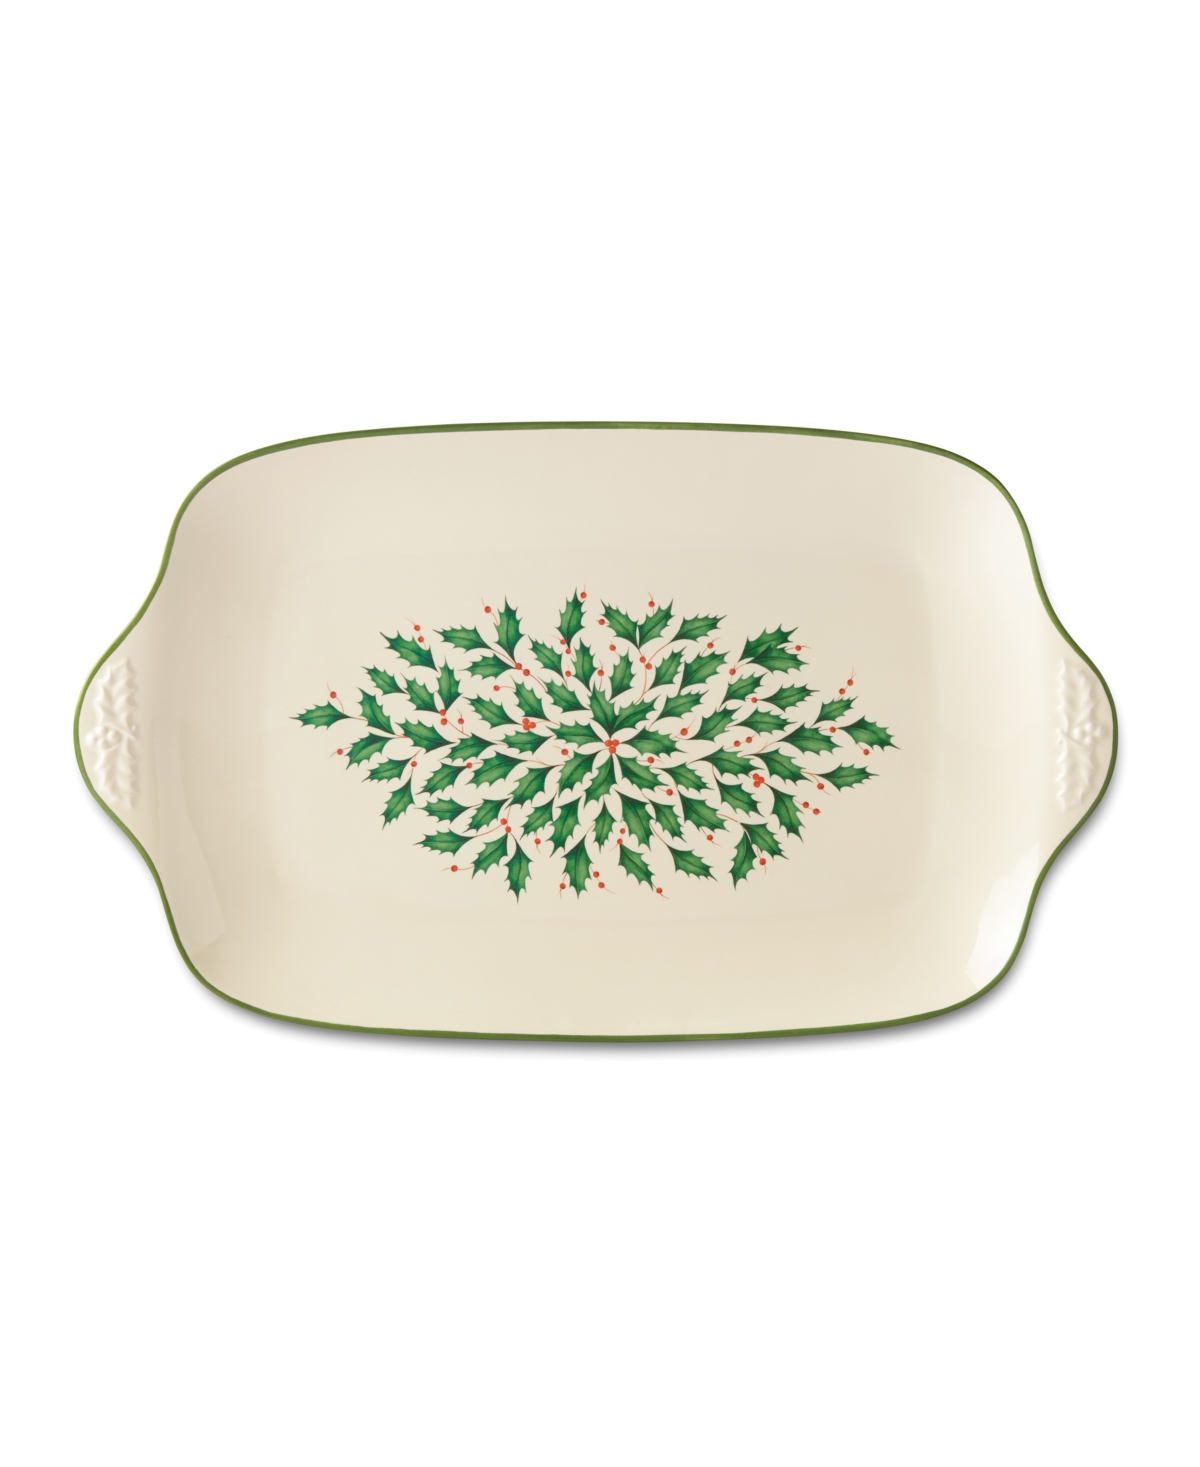 Lenox Holiday Large Serving Platter In Ivory W,green Holly Leaves And Red Berri